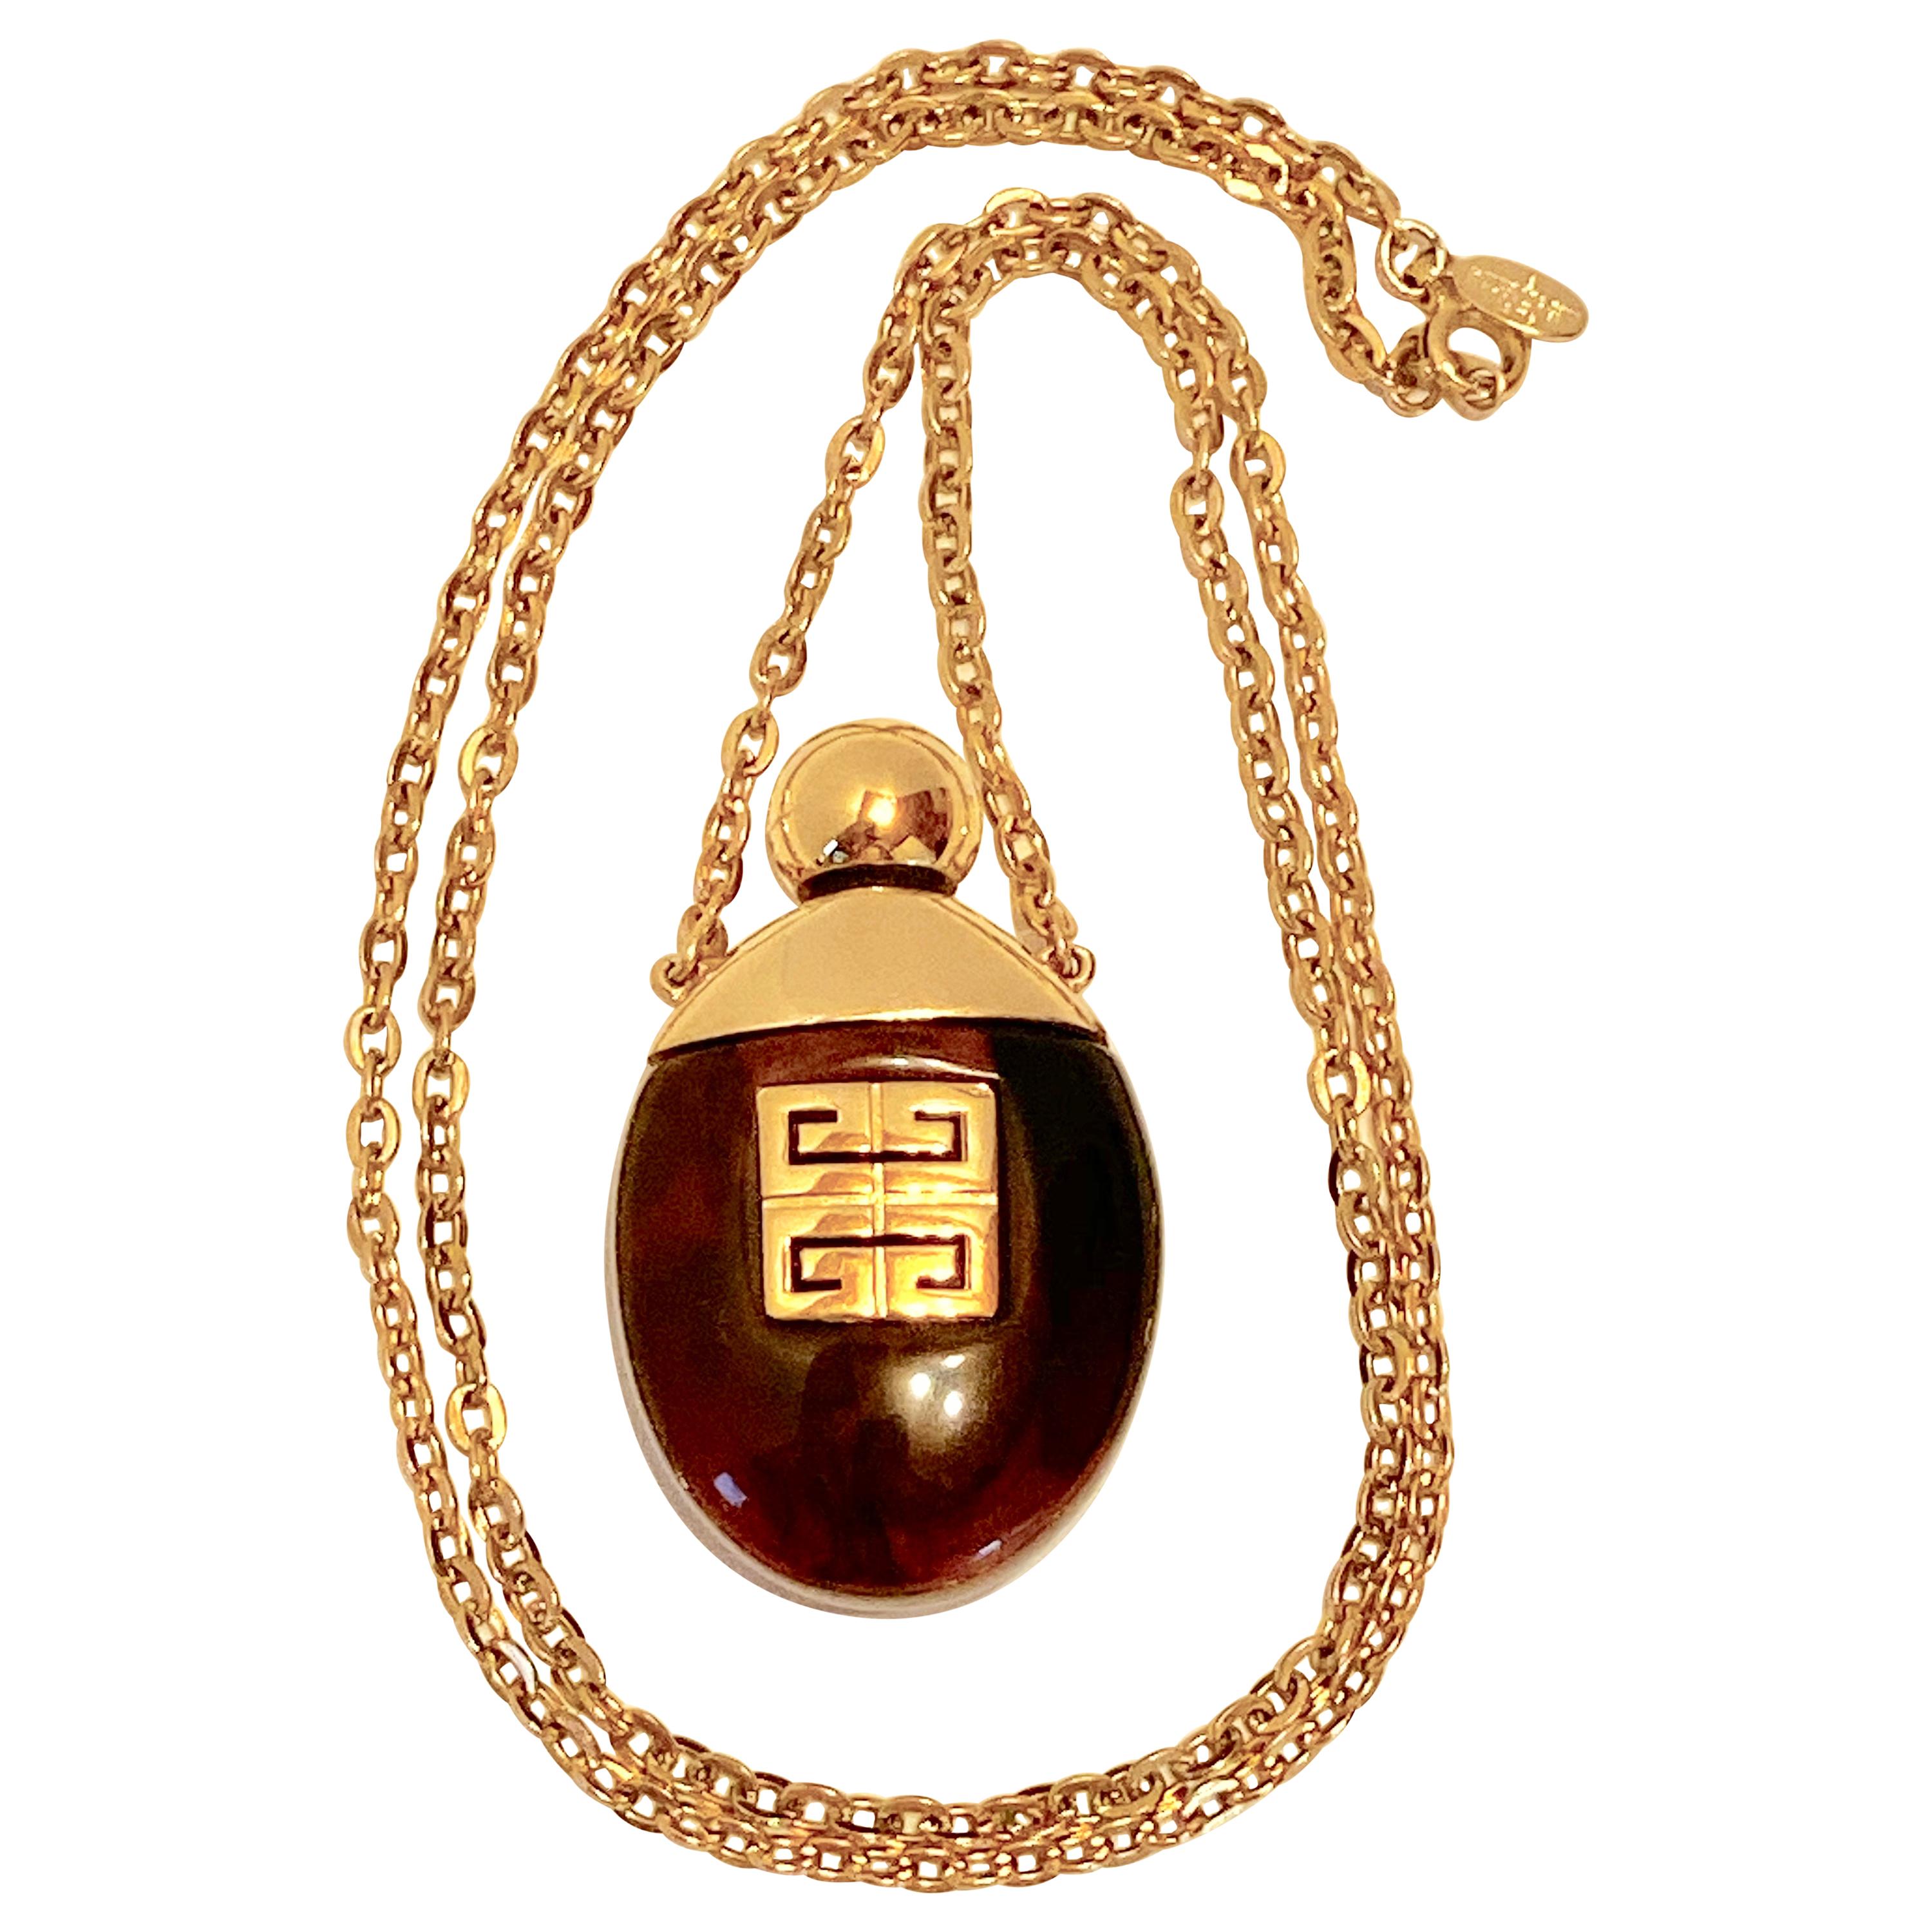 Givenchy "Limited Edition" 'Tortoise Shell' Lucite Perfume Pendant Necklace For Sale